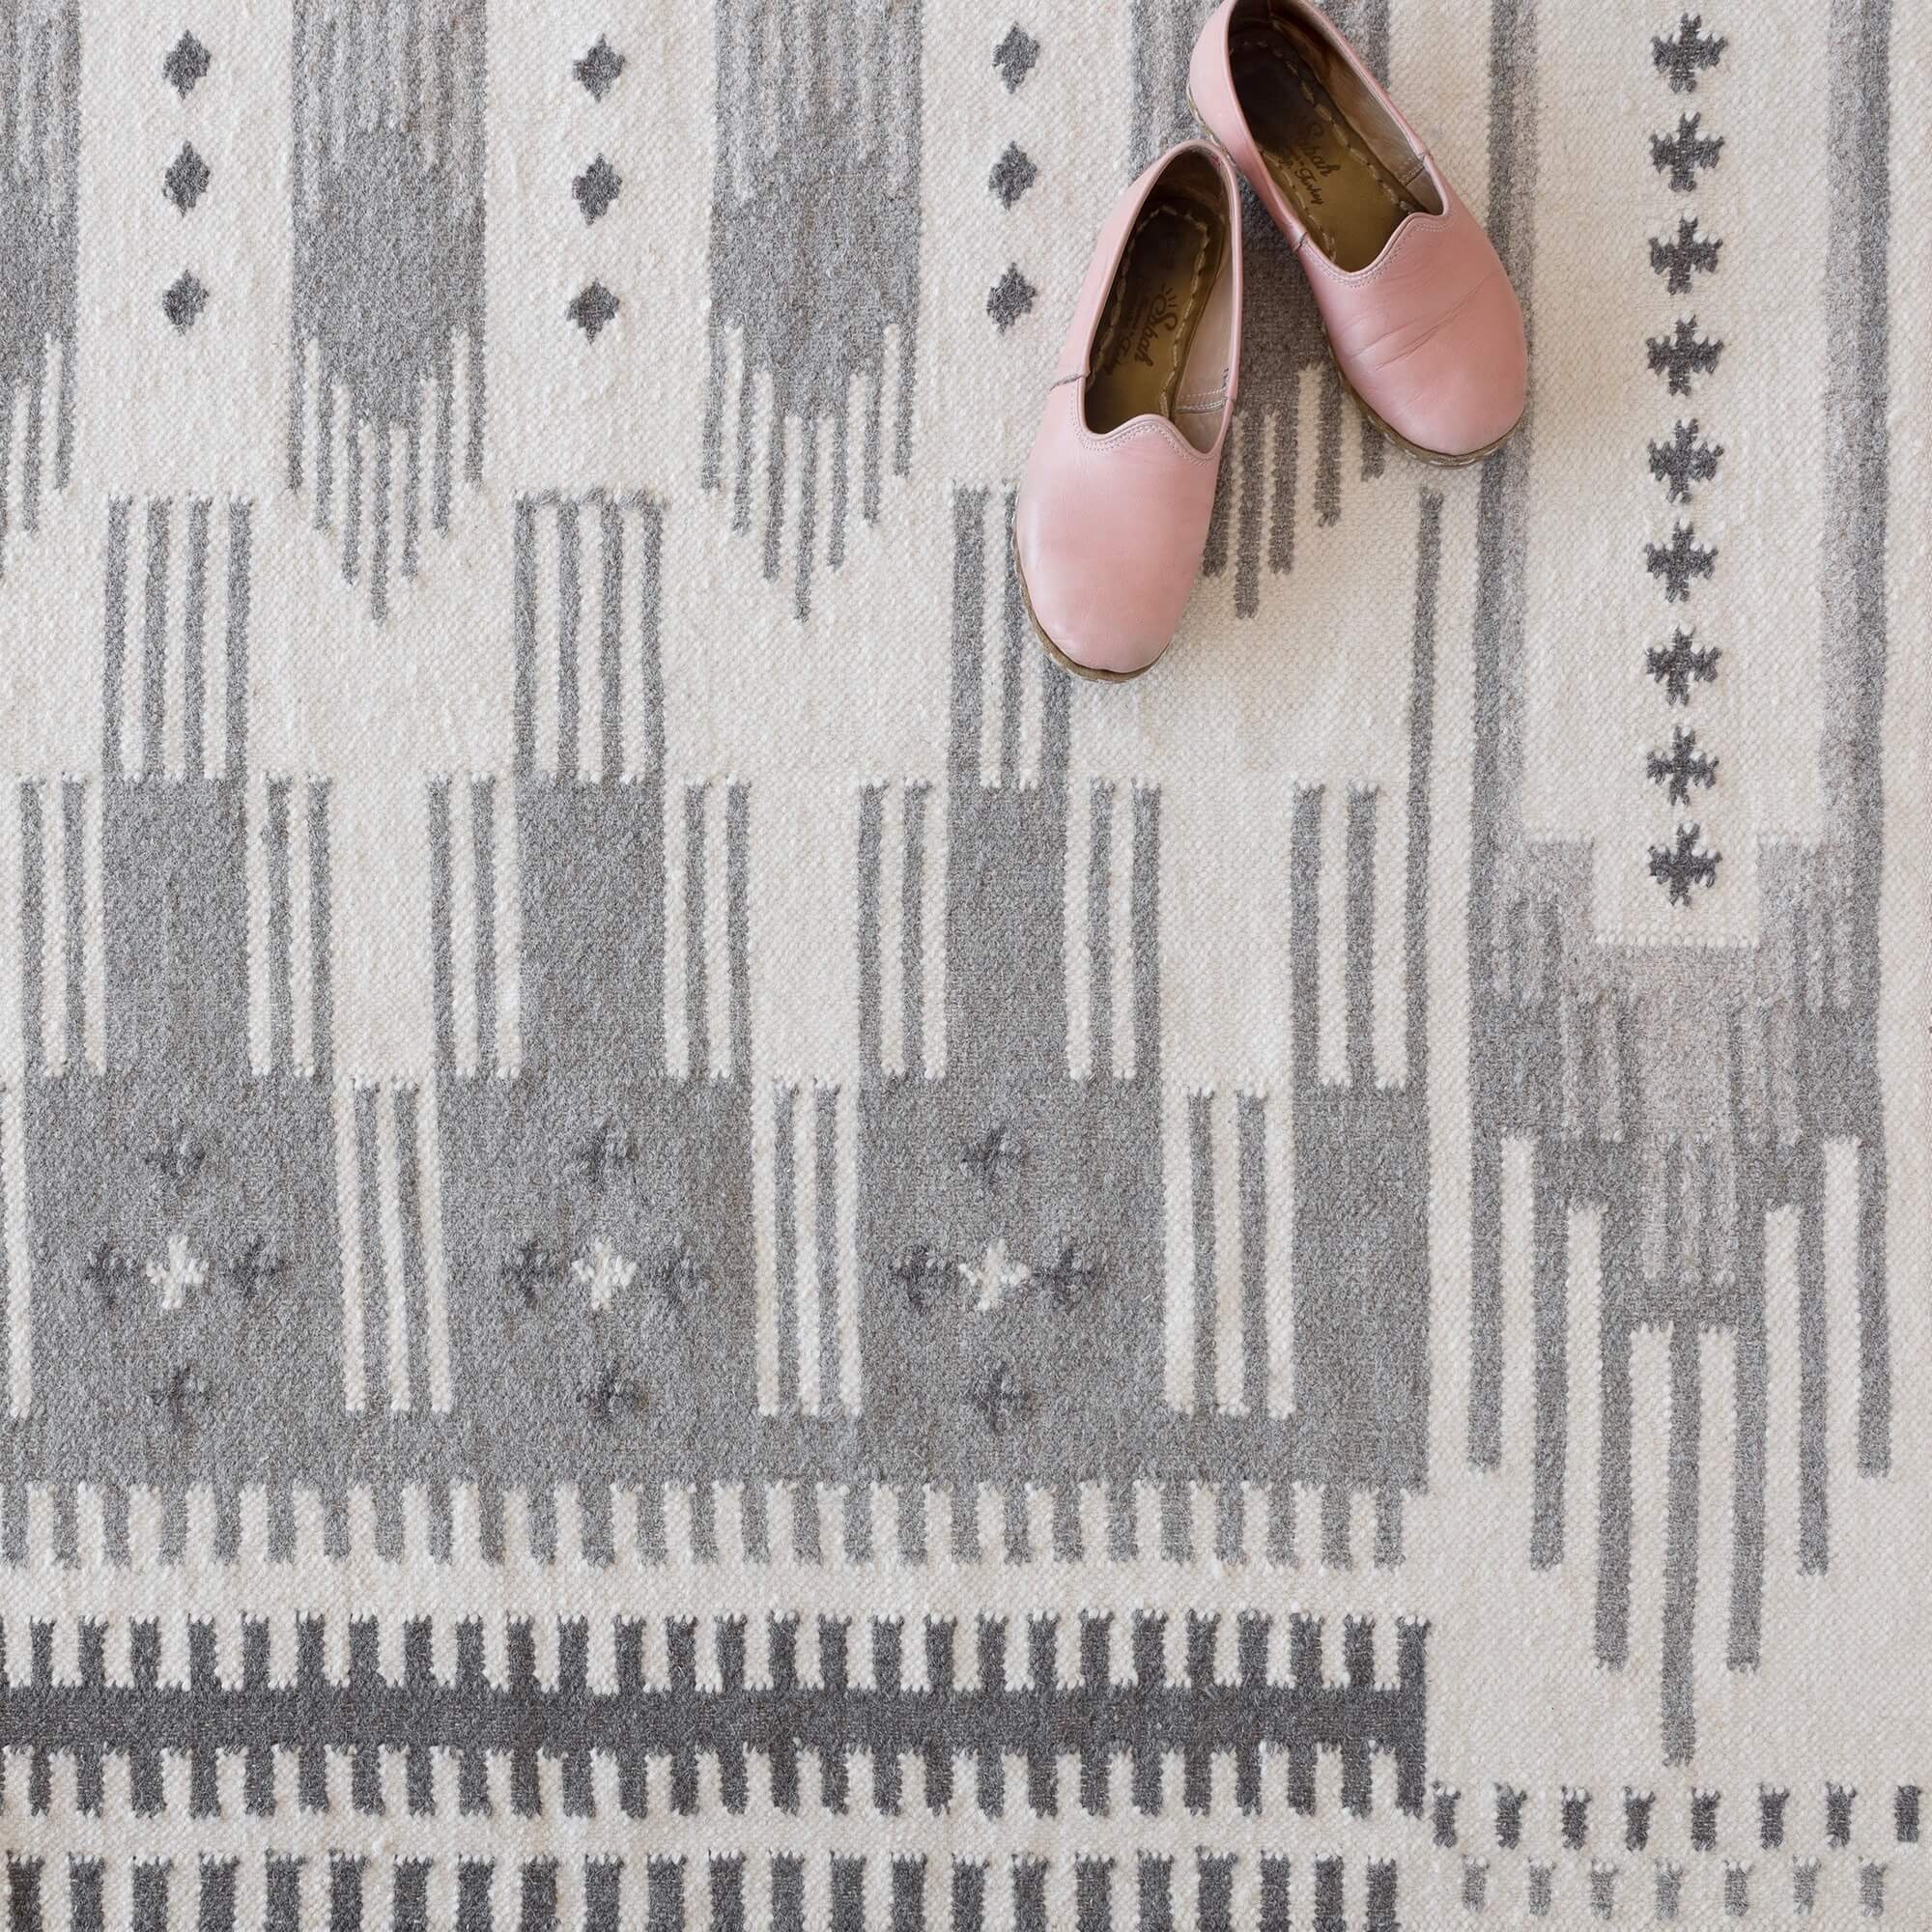 The Citizenry Asha Handwoven Area Rug | 6' x 9' | Grey - Image 5